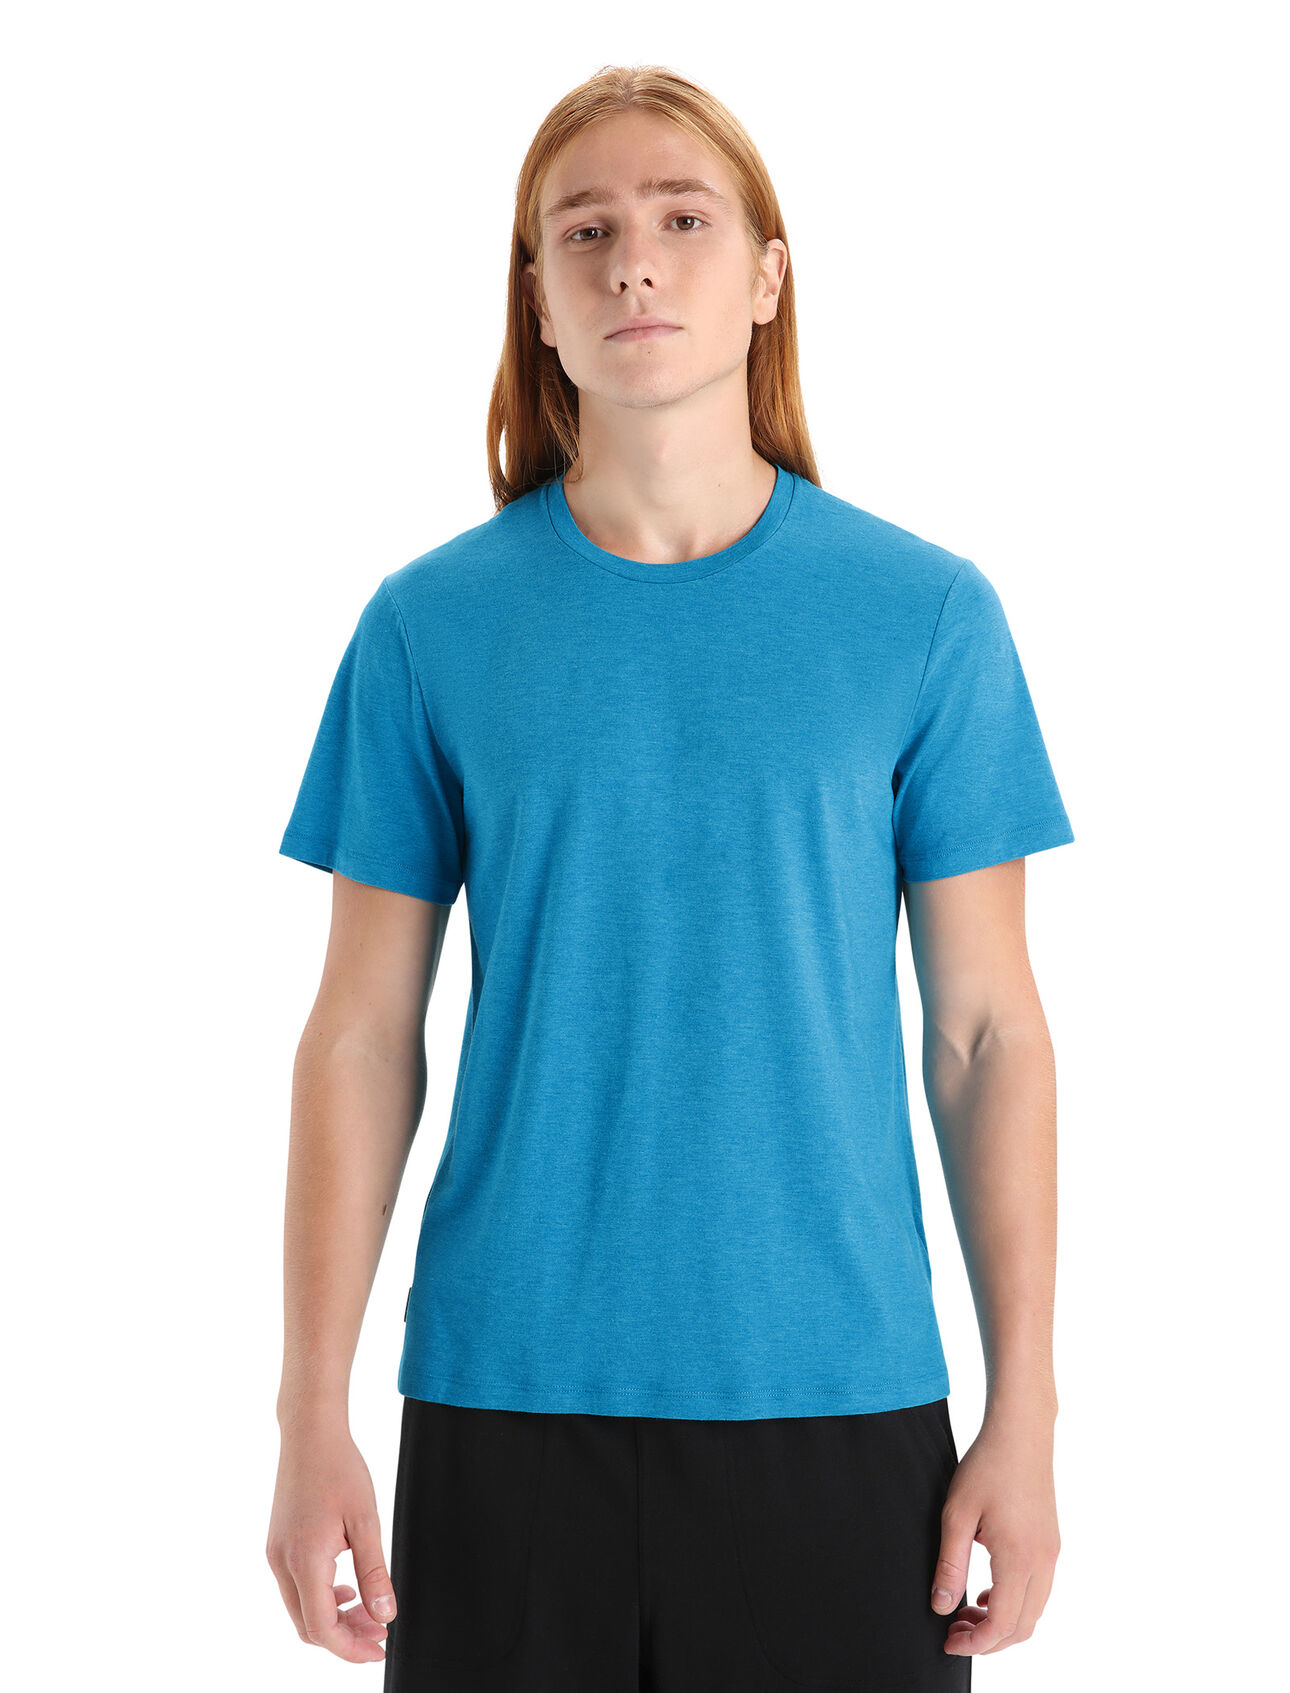 Mens Merino Central Classic Short Sleeve T-Shirt A versatile, everyday tee that goes anywhere in comfort, the Central Classic Short Sleeve Tee features a sustainable blend of natural merino wool and soft organically grown cotton.